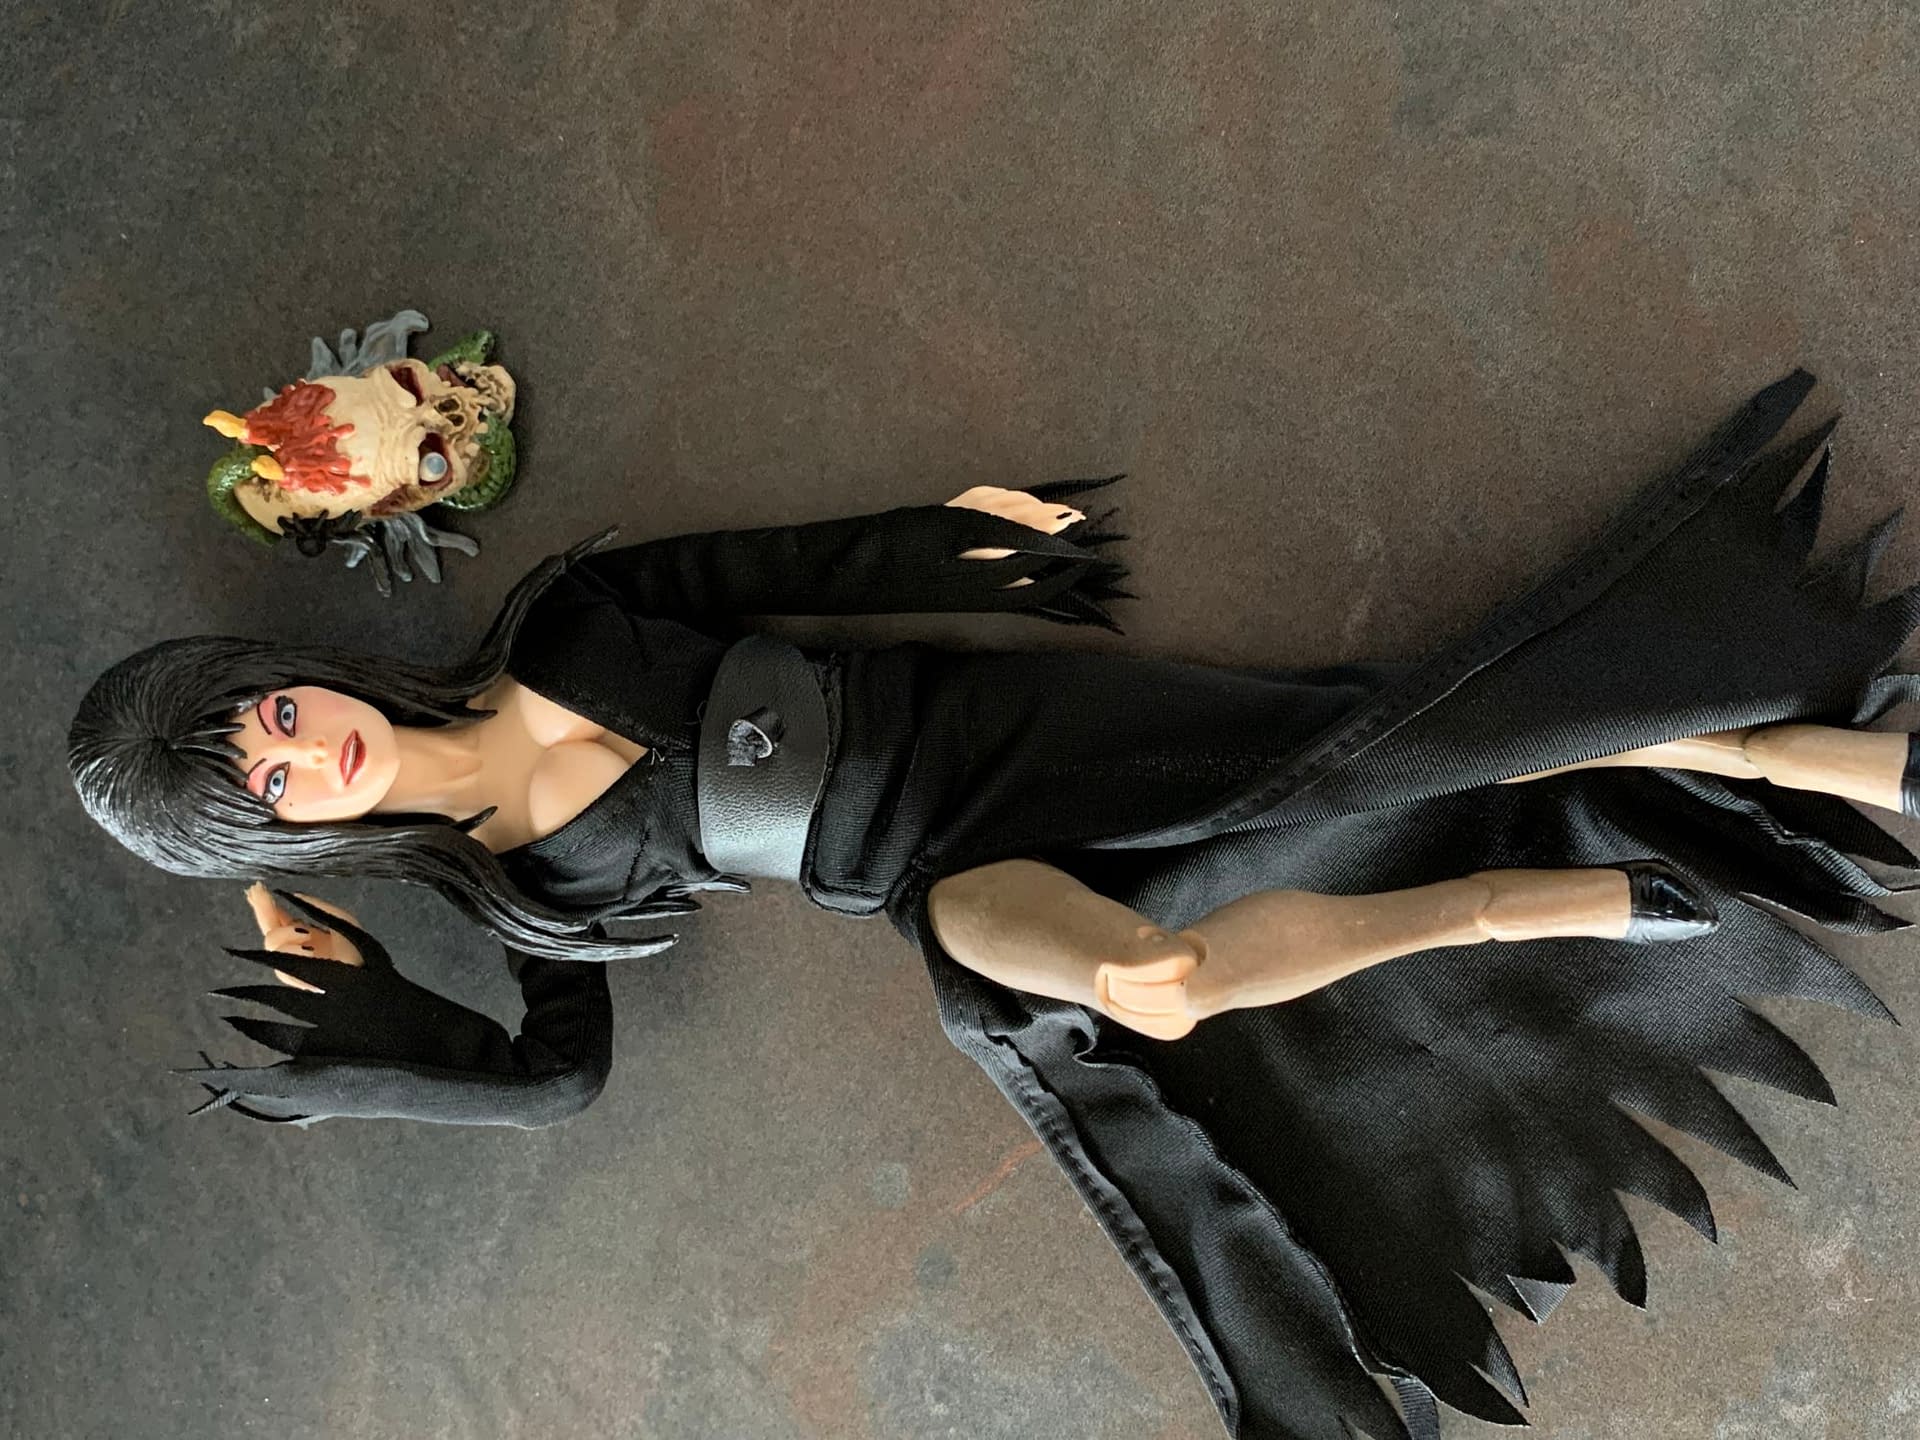 Elvira Gets The Tribute She Deserves With New NECA Figure